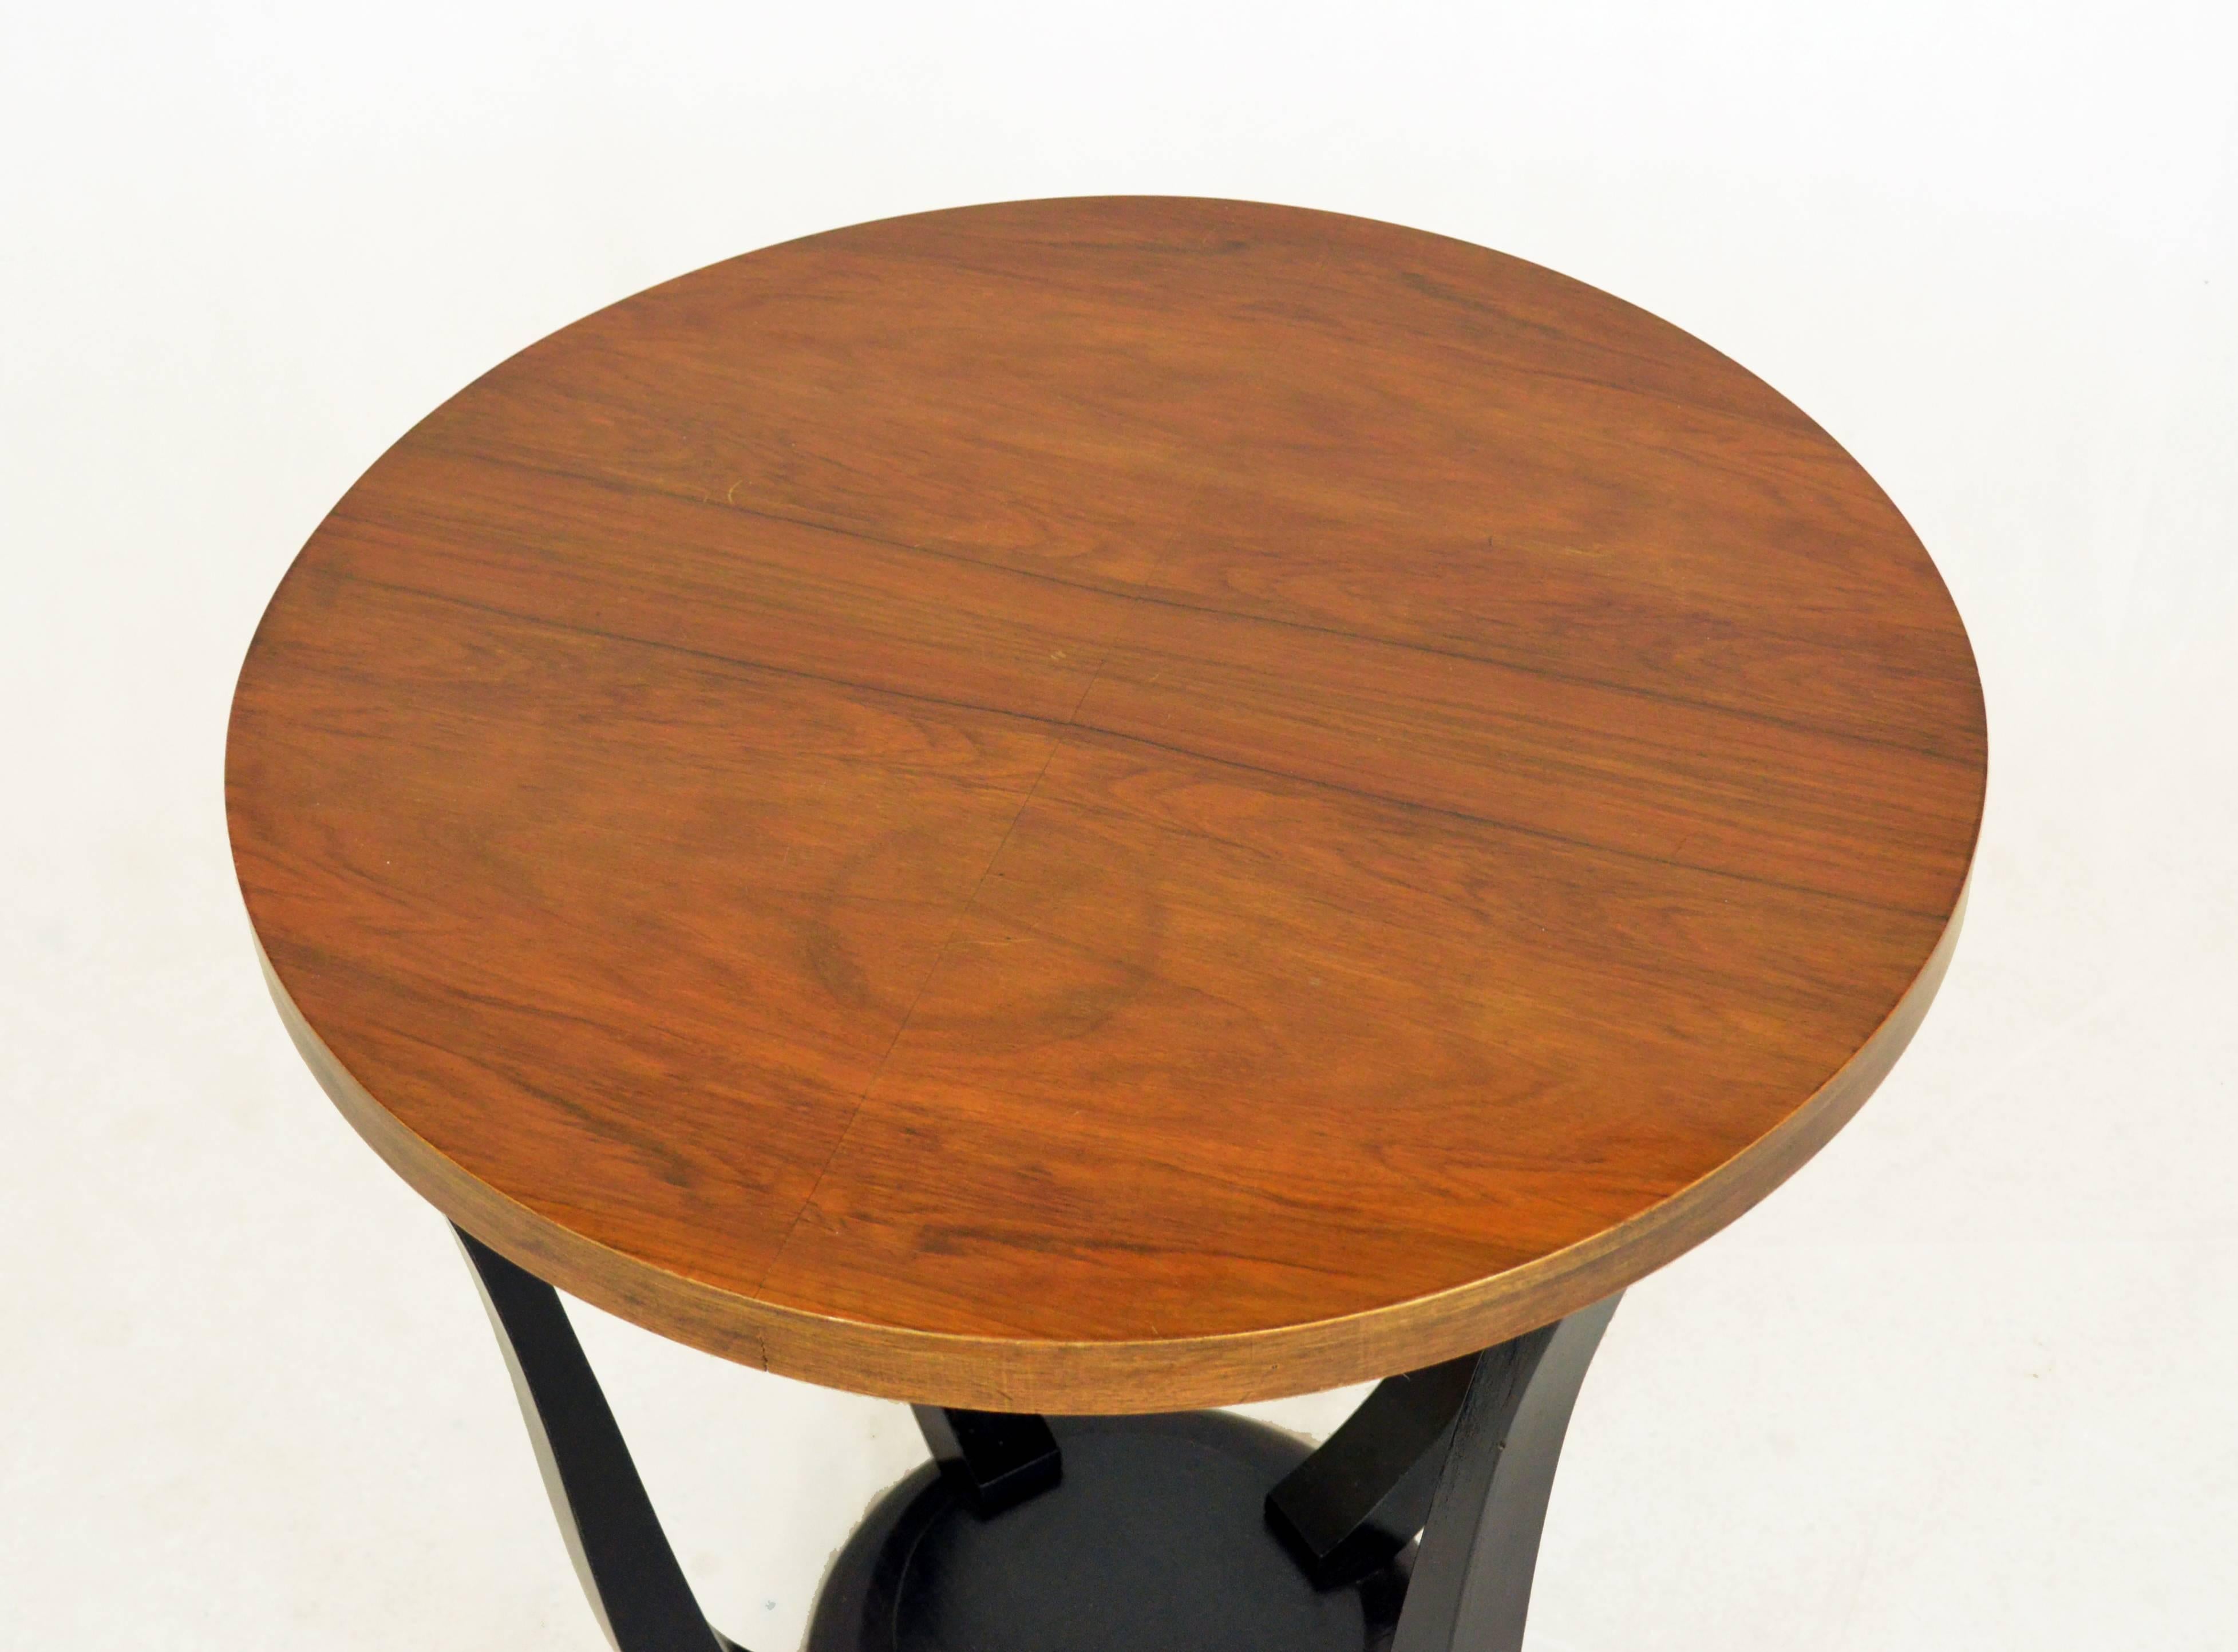 A small ductile Art Dèco gueridon, from France, from 1920s.
The table has ebonized legs which connect the top which is in natural nutwood. Conservative restoration consisted in renewing the polish of shelves and retouching the ebonized parts. Size